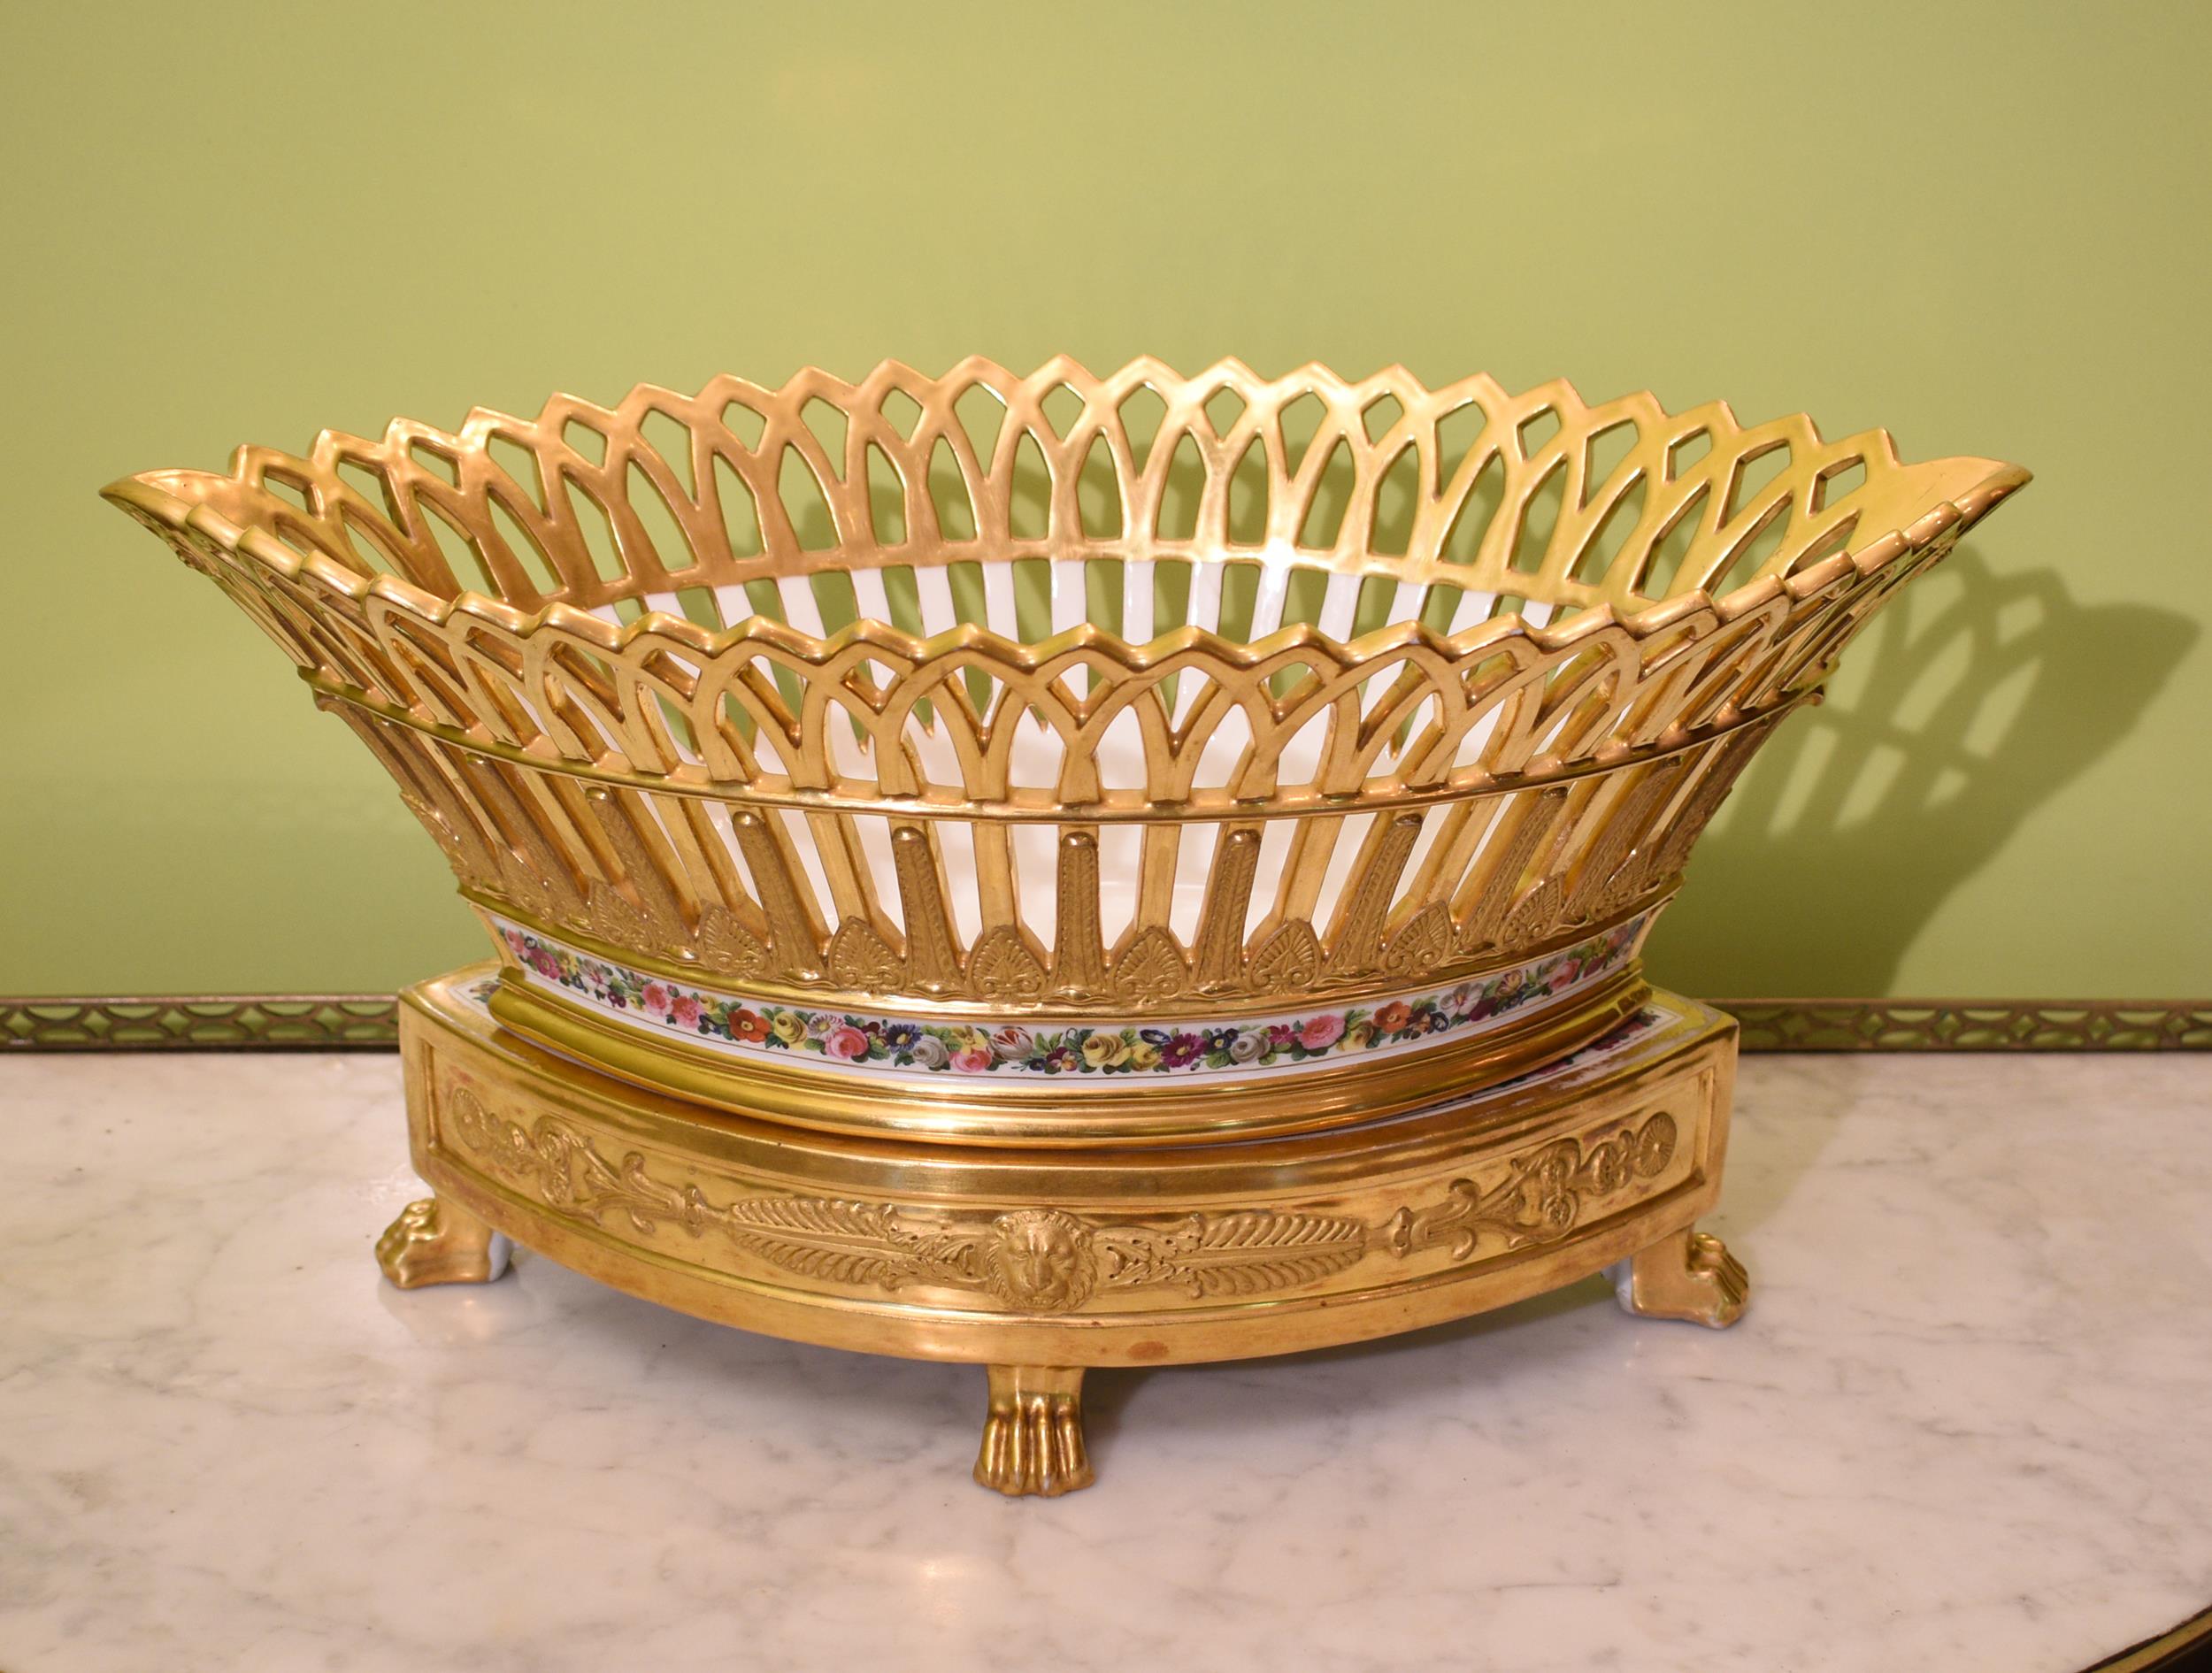 19TH C. FRENCH FRUIT BASKET. Likely